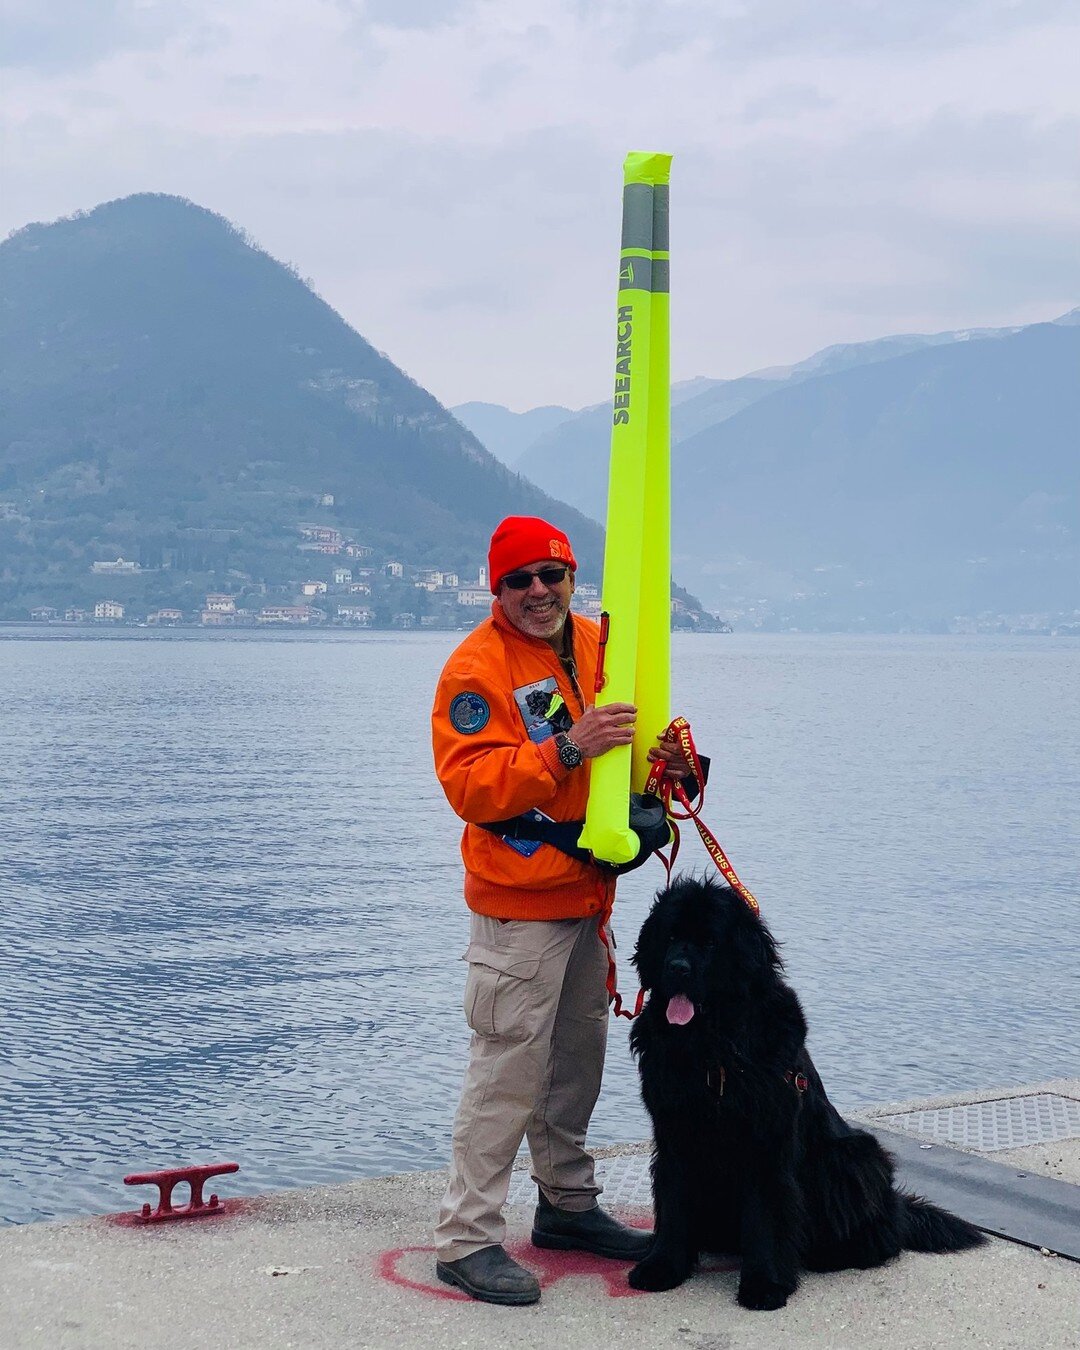 All smiles from our friends in Italy. The SeeArch is ready to be tested with rescue dogs! Head over to your website for 10% OFF your first purchase today!

#sea #sailing #sailinglife #boat #boatlife #boating #canoeing #seearchalwayswithyou #alwayssea